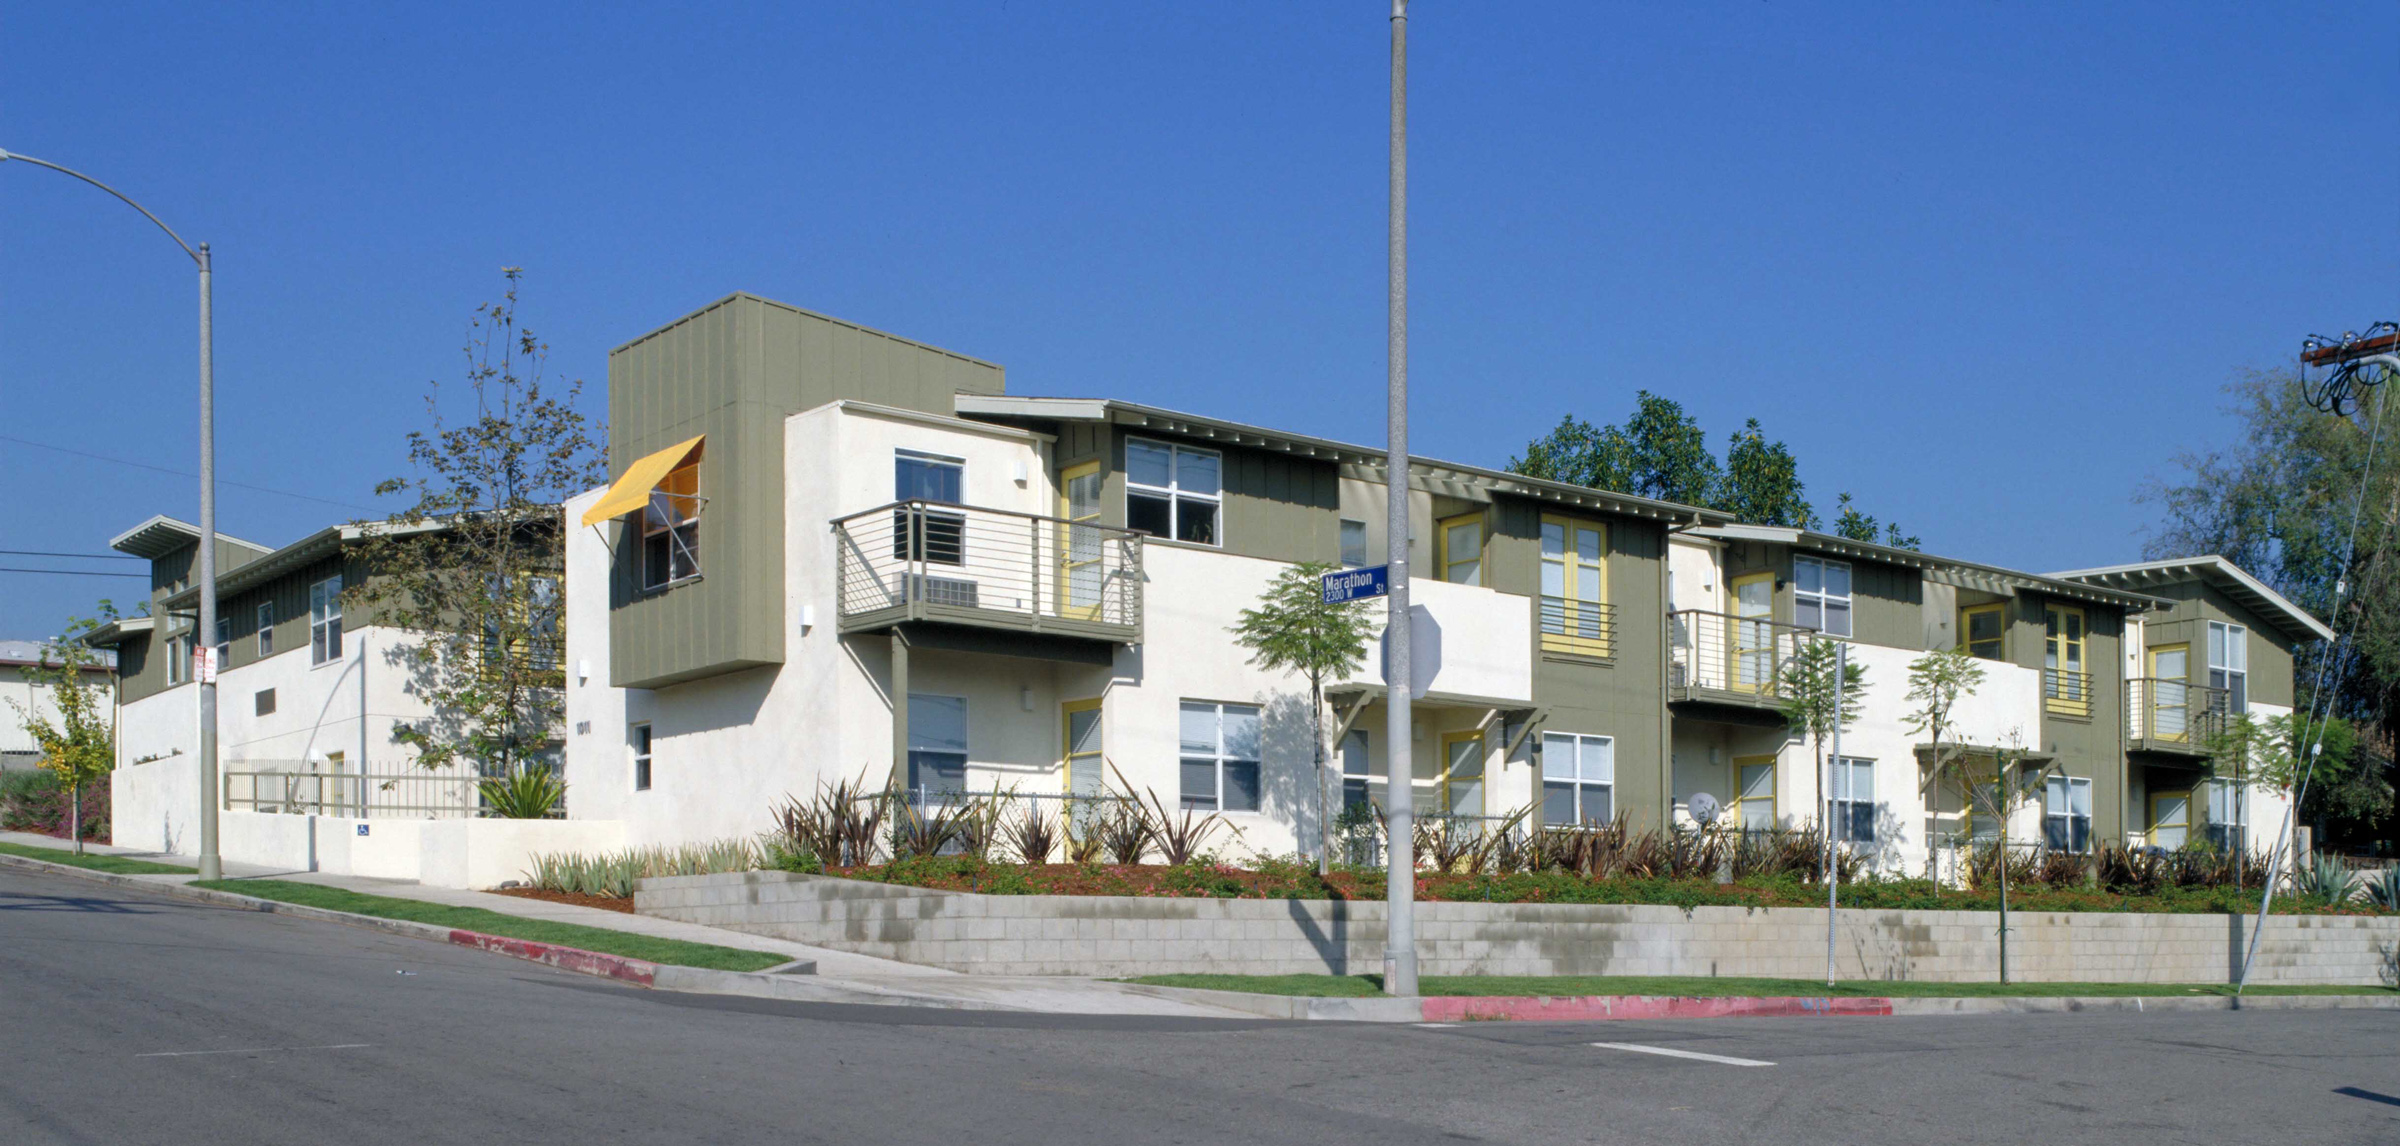 Street view of Waterloo Heights Apartments. The building is on the corner of two streets and street lamp on both sides